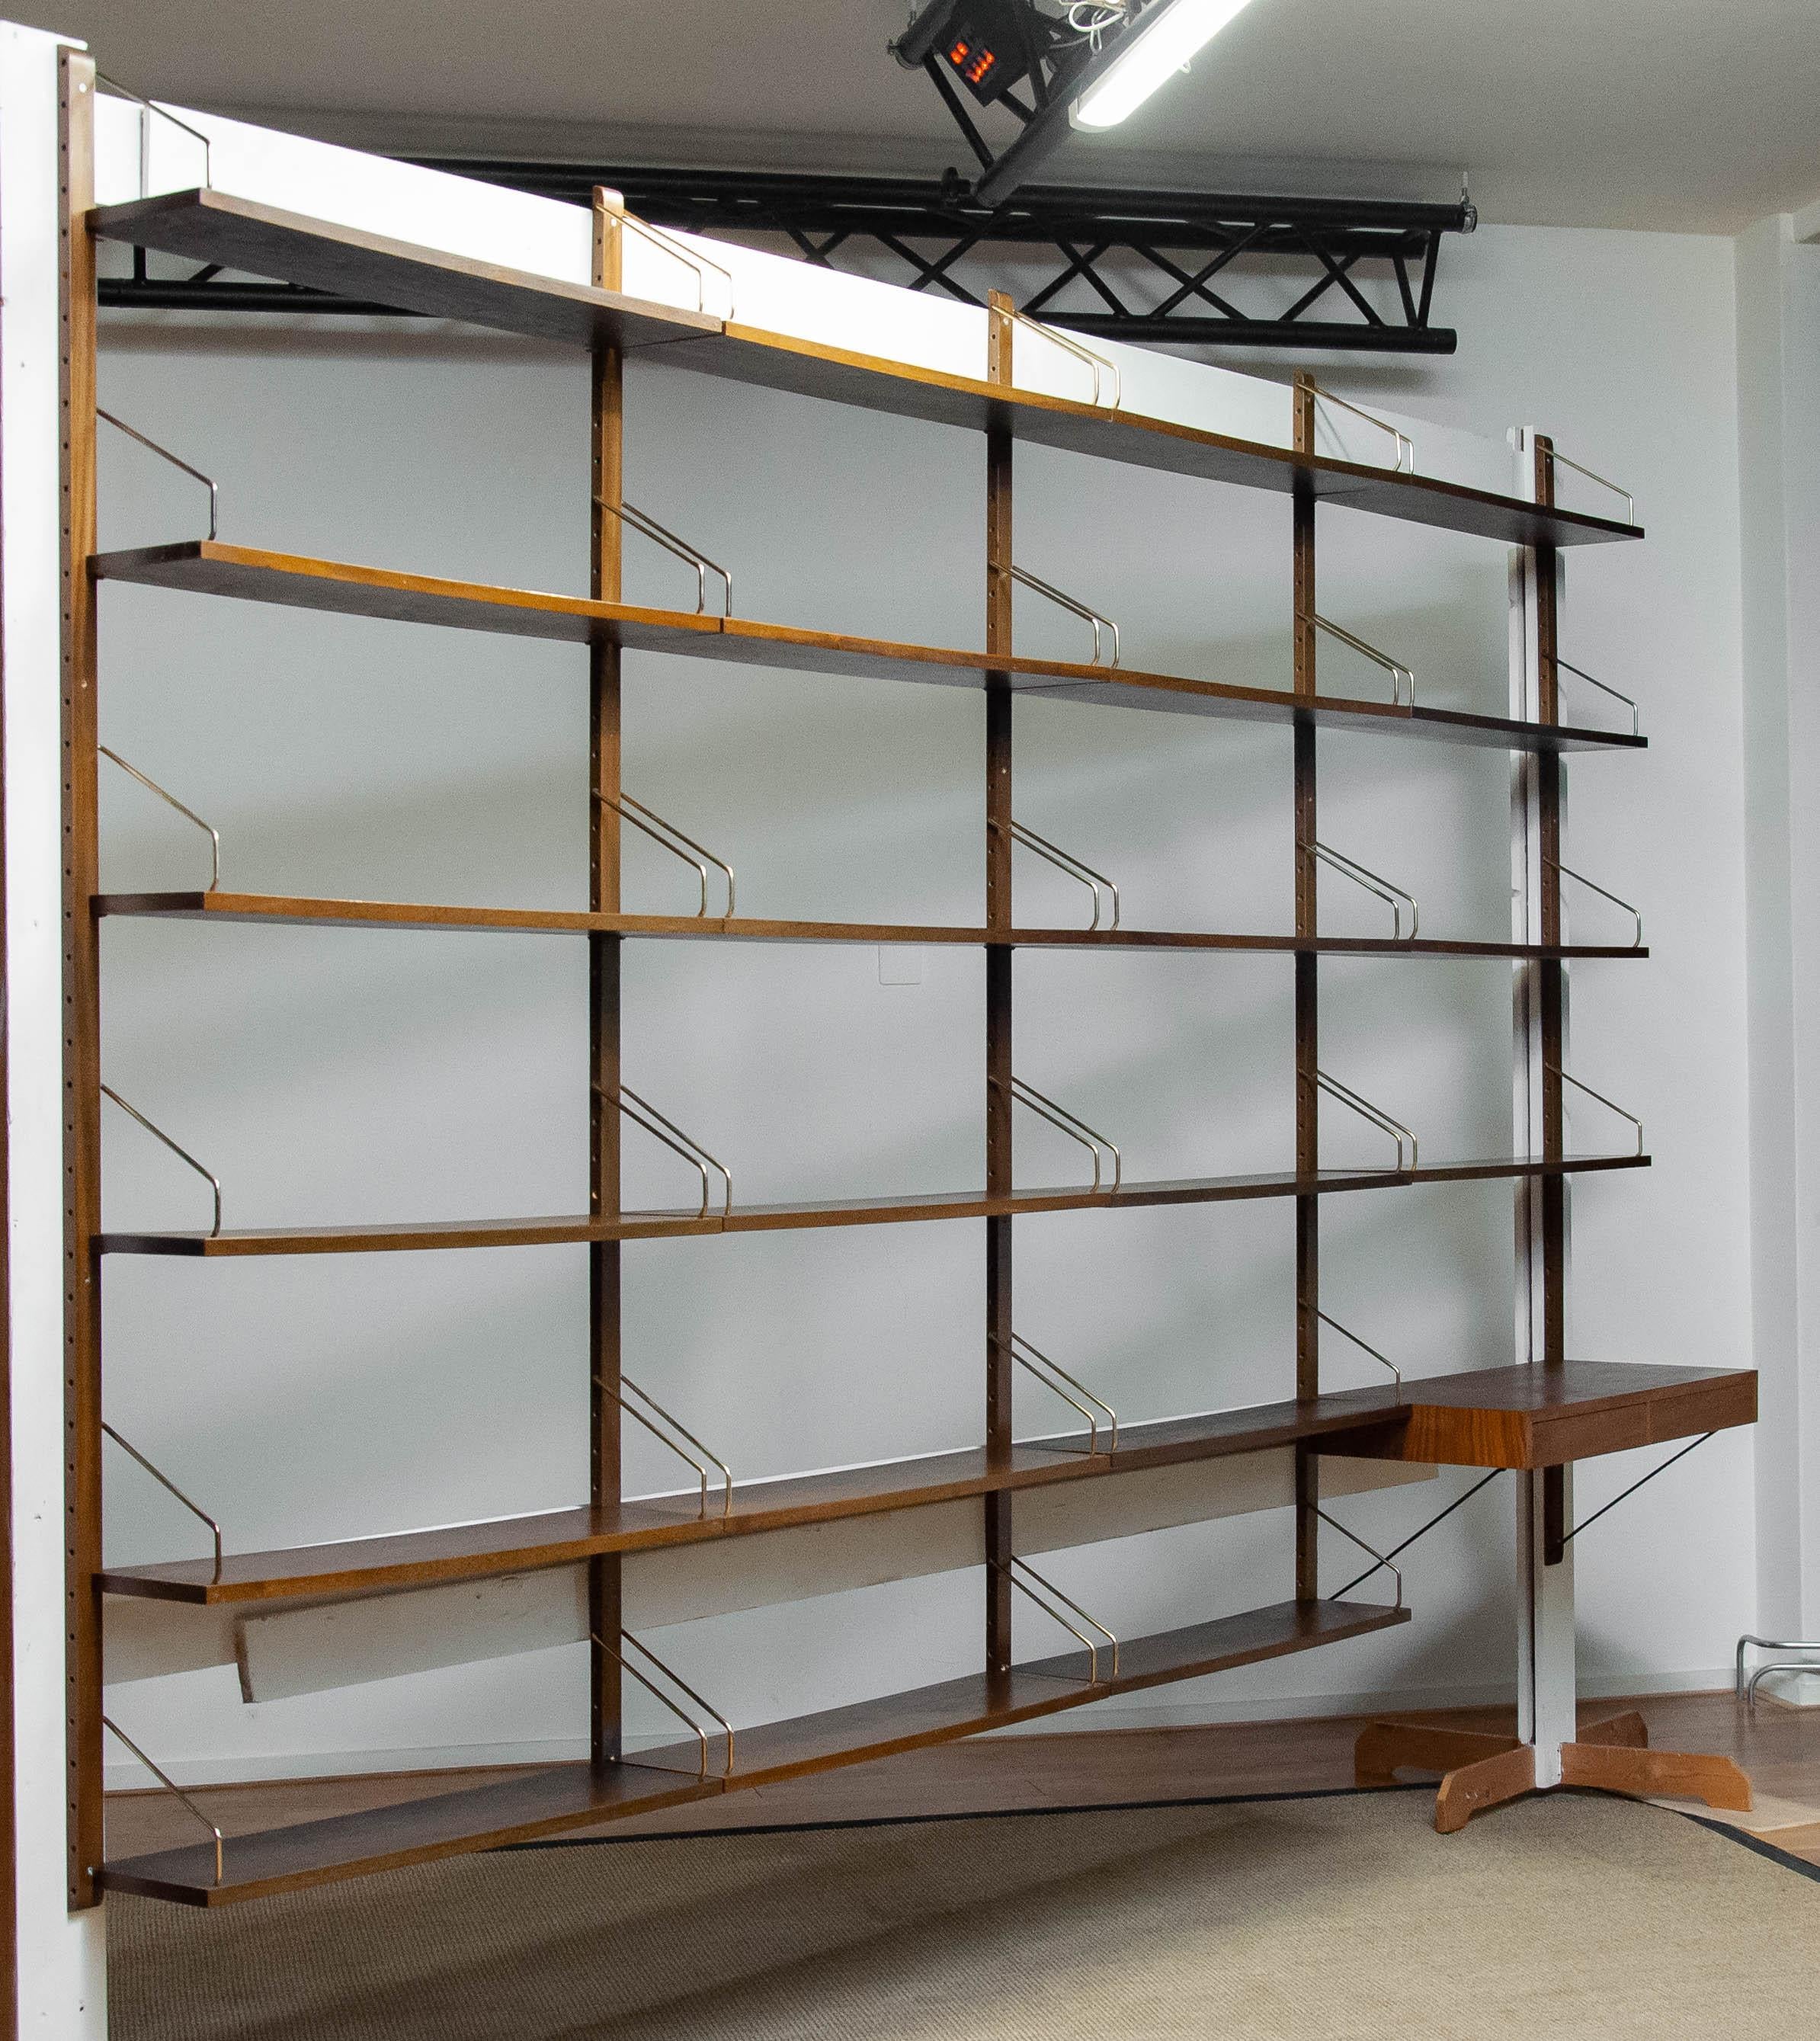 Beautiful and large modulair wall system / bookcase in walnut with brass supports designed by Poul Cadovius for Cado in Denmark 1950's.
This large walnut system consists five wall slats in beech each 198 cm / 78 inches length.
twenty two shelfs